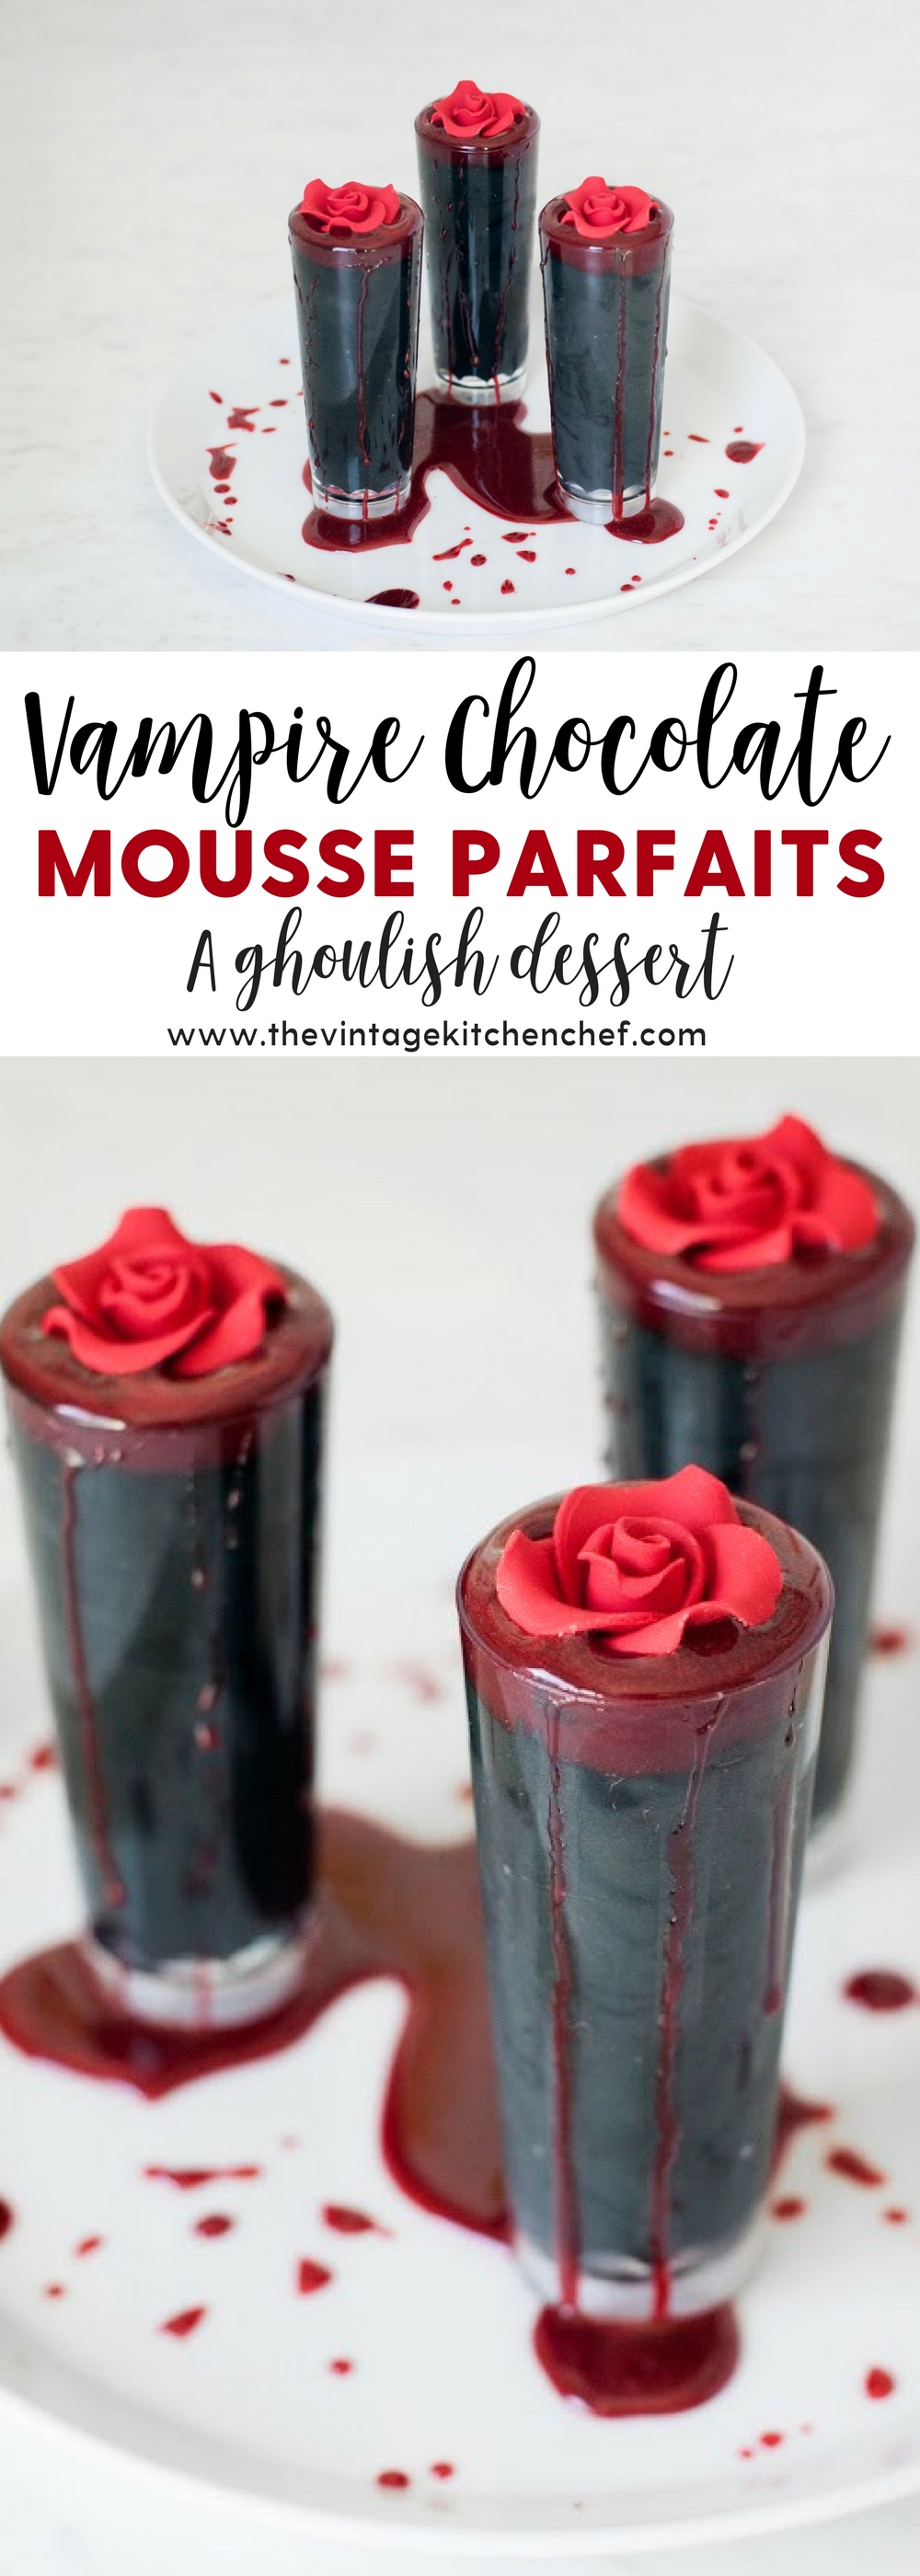 A creepy, decadent and insanely delicious mini dessert! Rich and creamy chocolate mousse with a splash of edible blood on the top...what's not to love?